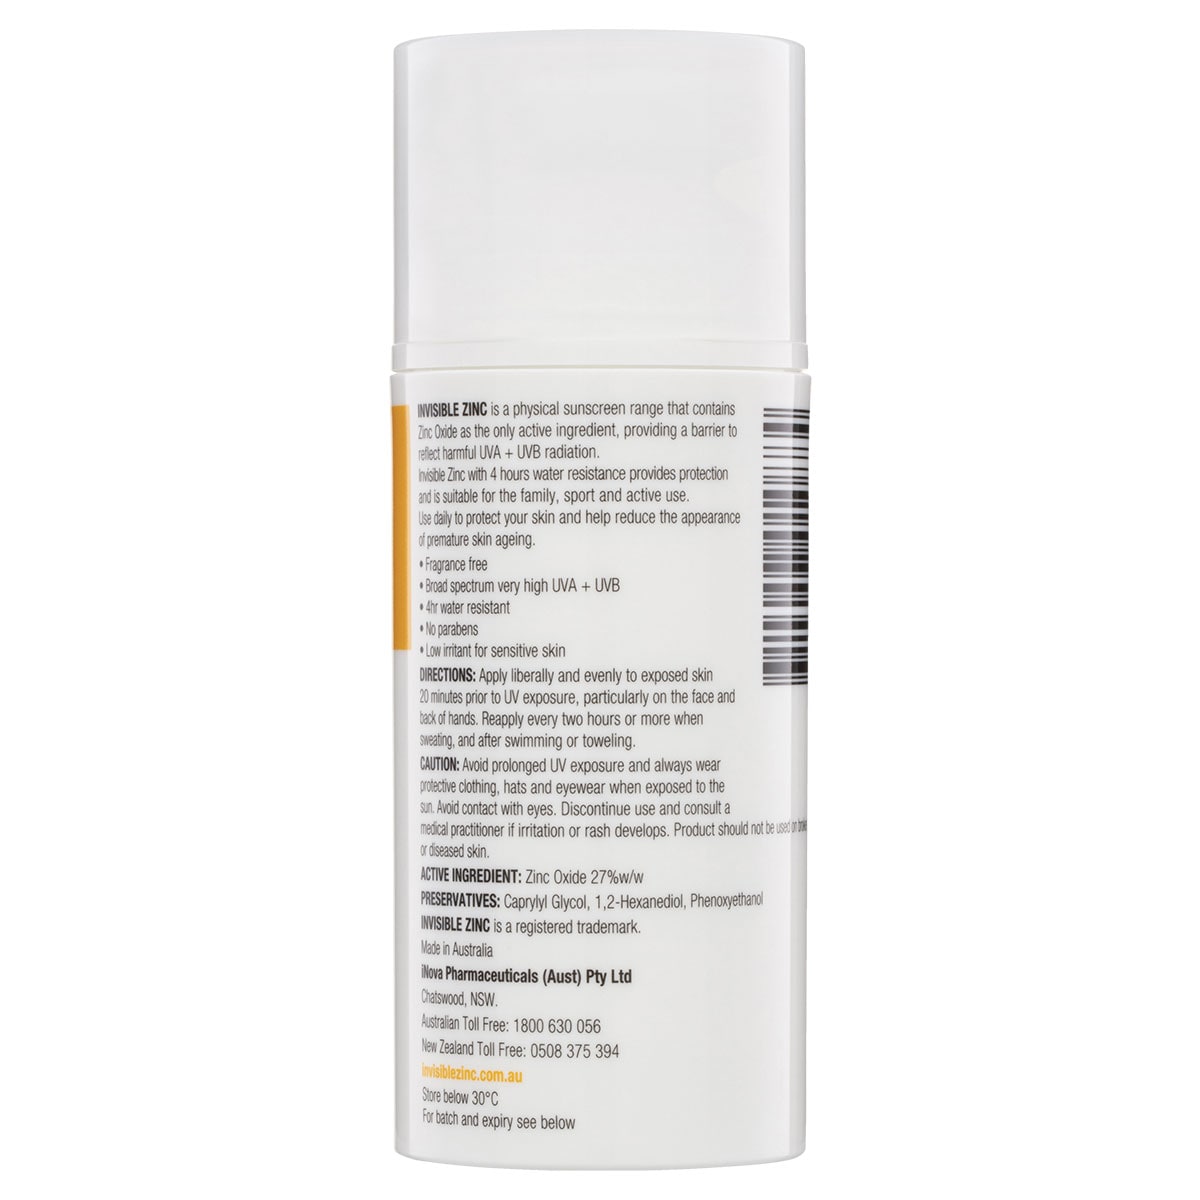 Invisible Zinc Sunscreen 4 Hour Water Resistant SPF50+ 100ml